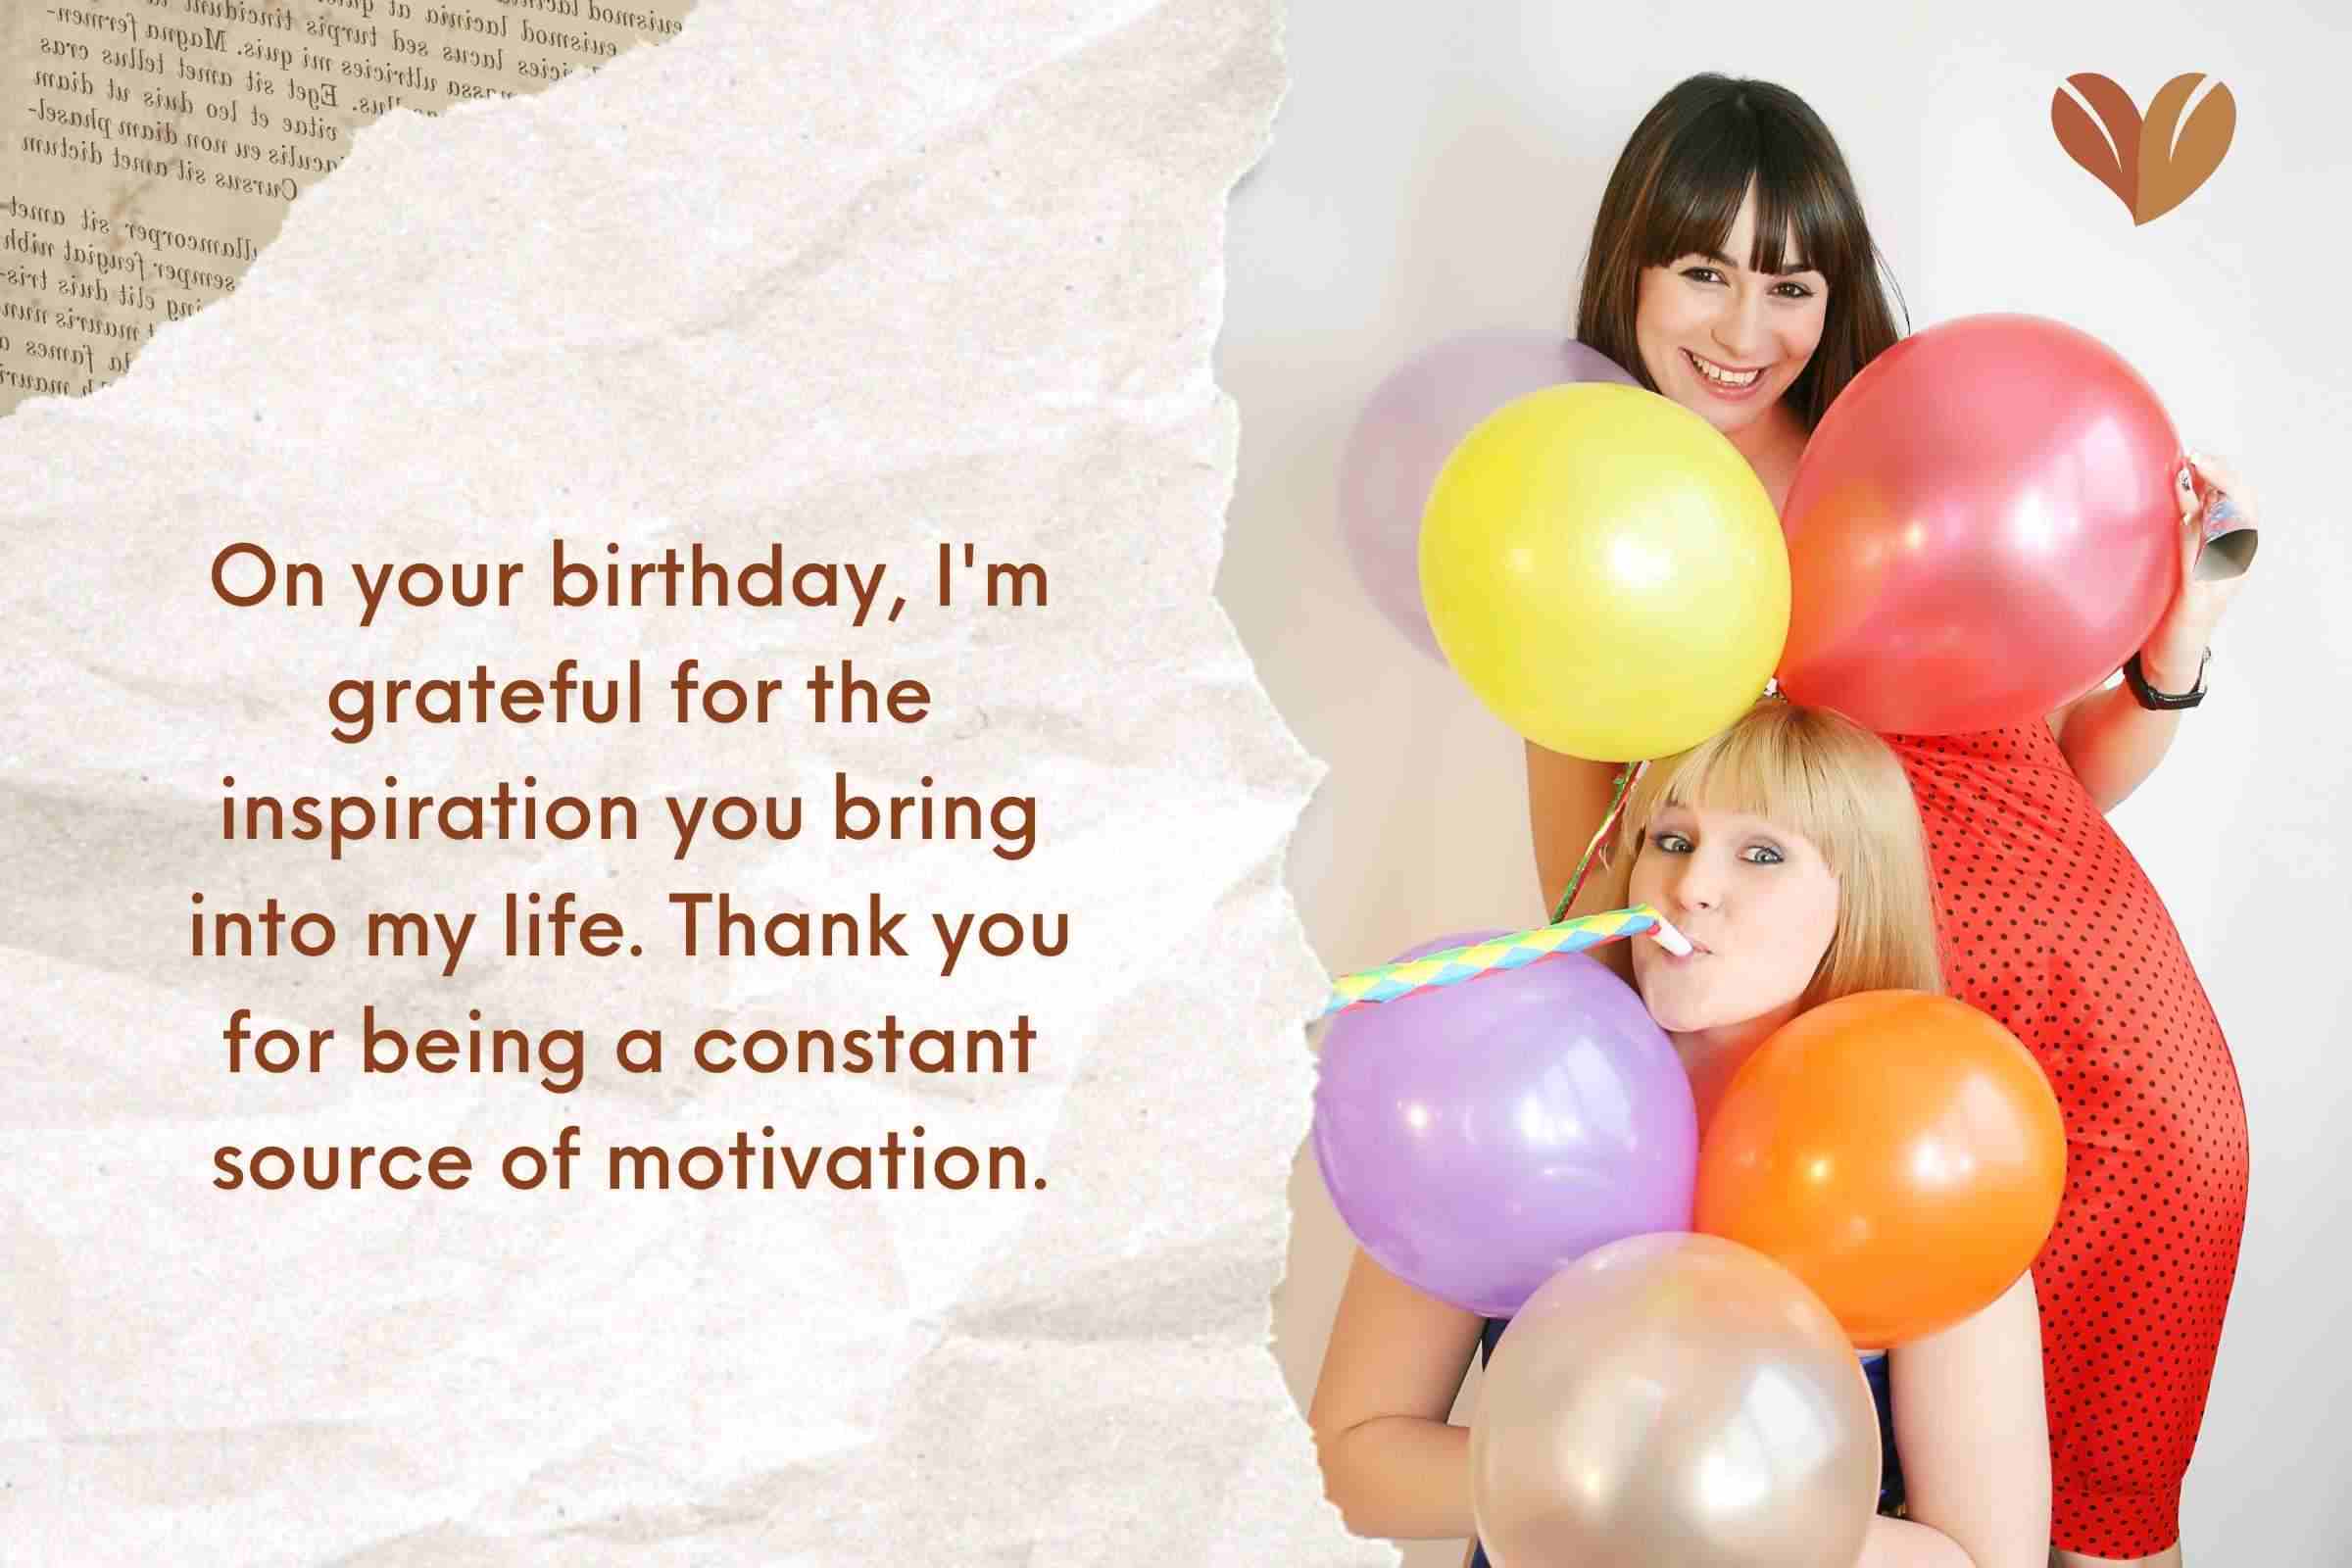 Inspiring words adorn these birthday cards, offering motivation for a dear friend.